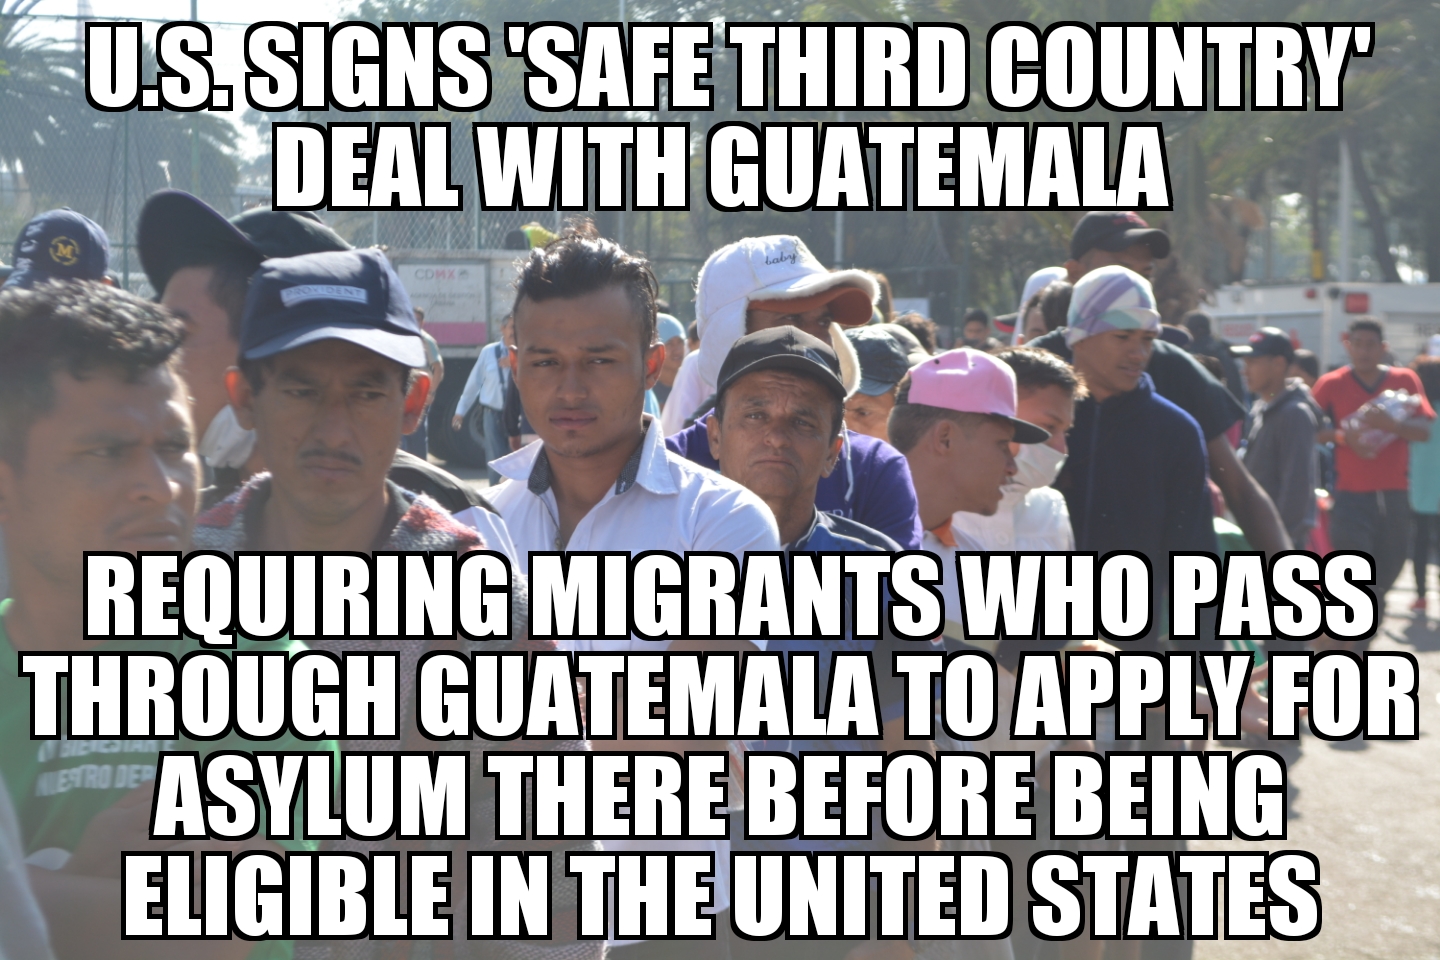 U.S. signs ‘safe third country’ deal with Guatemala